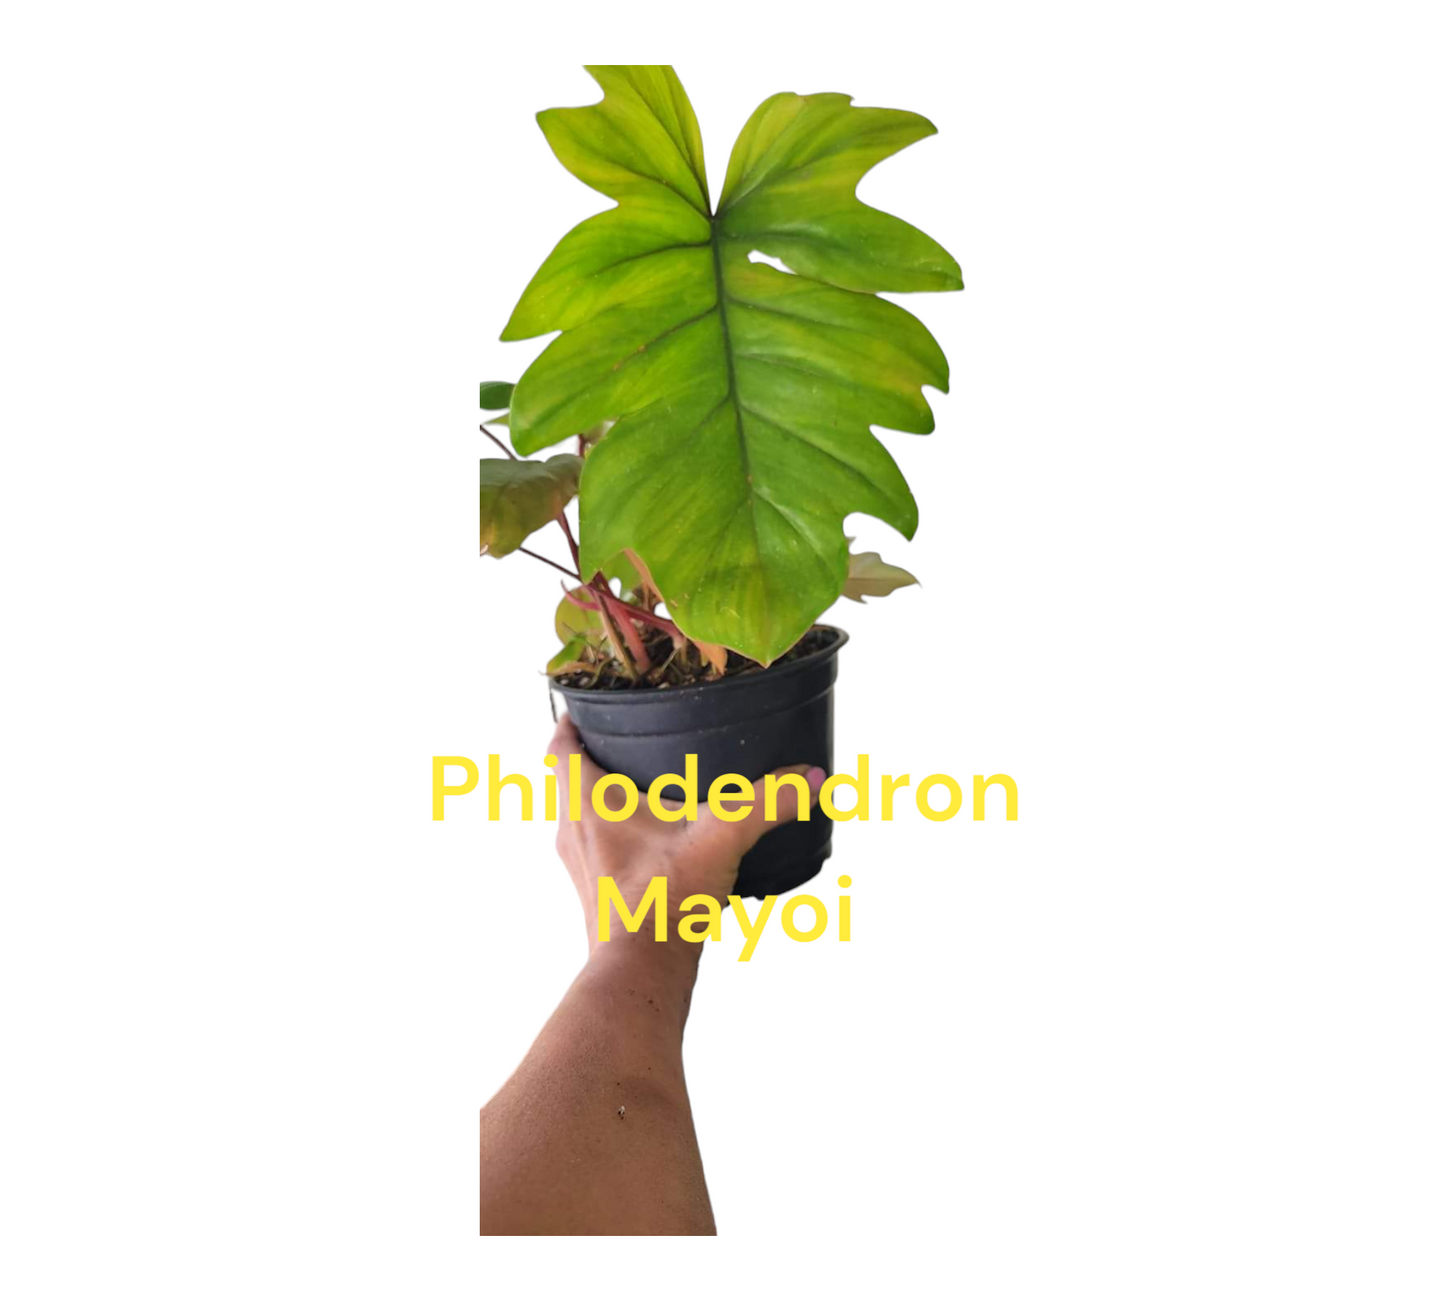 Philodendron Mayoi in four inch nursery pot. Photos br shipping.